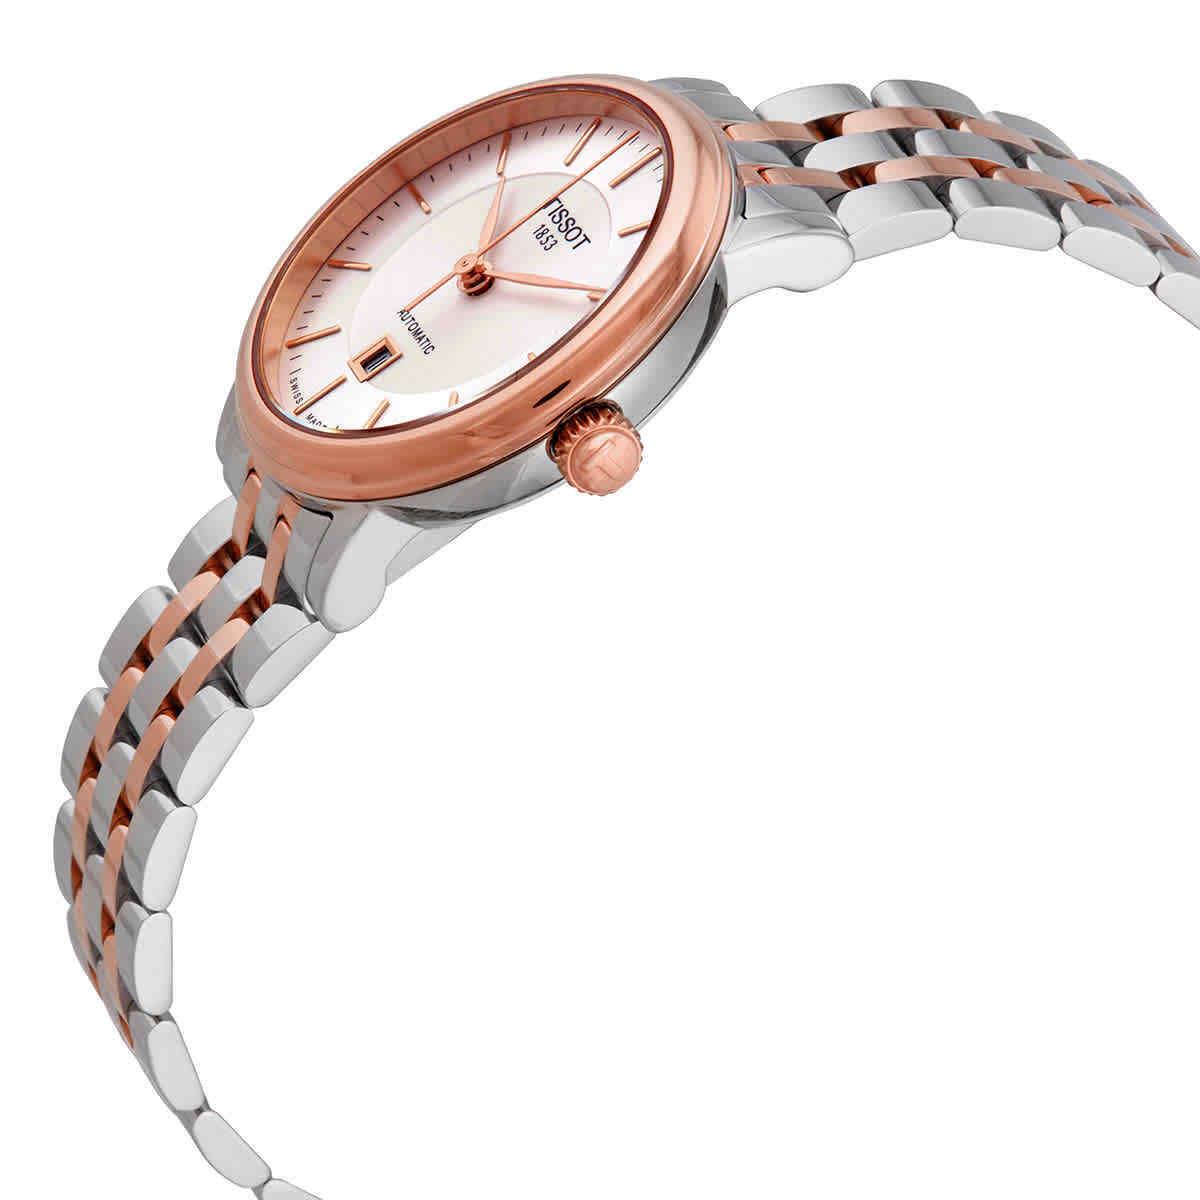 Tissot T-classic Carson Silver Dial Ladies Watch T122.207.22.031.01 - Dial: Silver, Band: Silver, Pink, Bezel: Pink